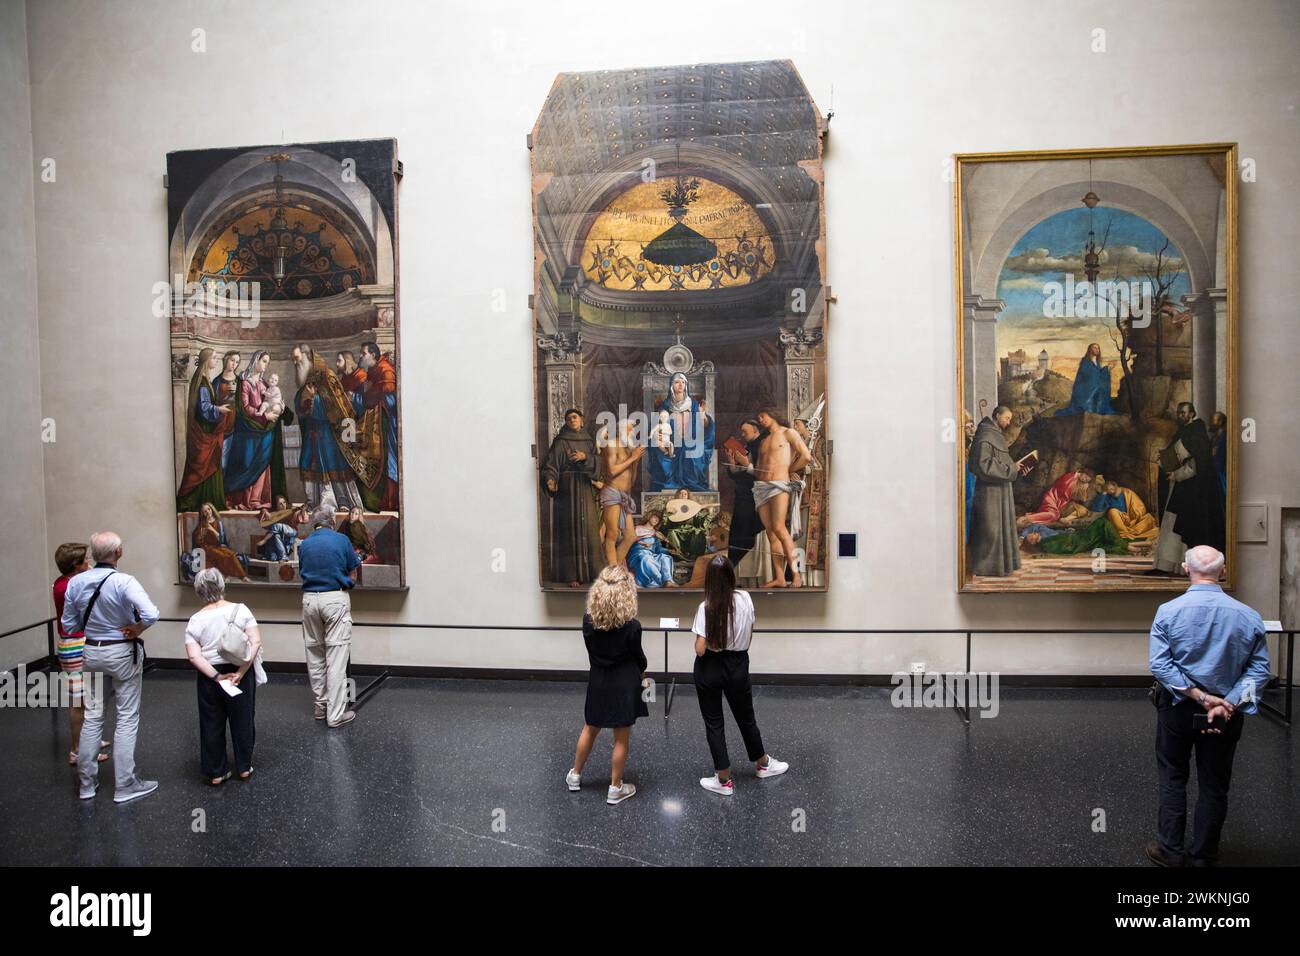 The Academy Gallery, also known as Gallerie dell'Accademia, houses an incredible collection of Venetian and European art from the 14th to the 18th cen Stock Photo